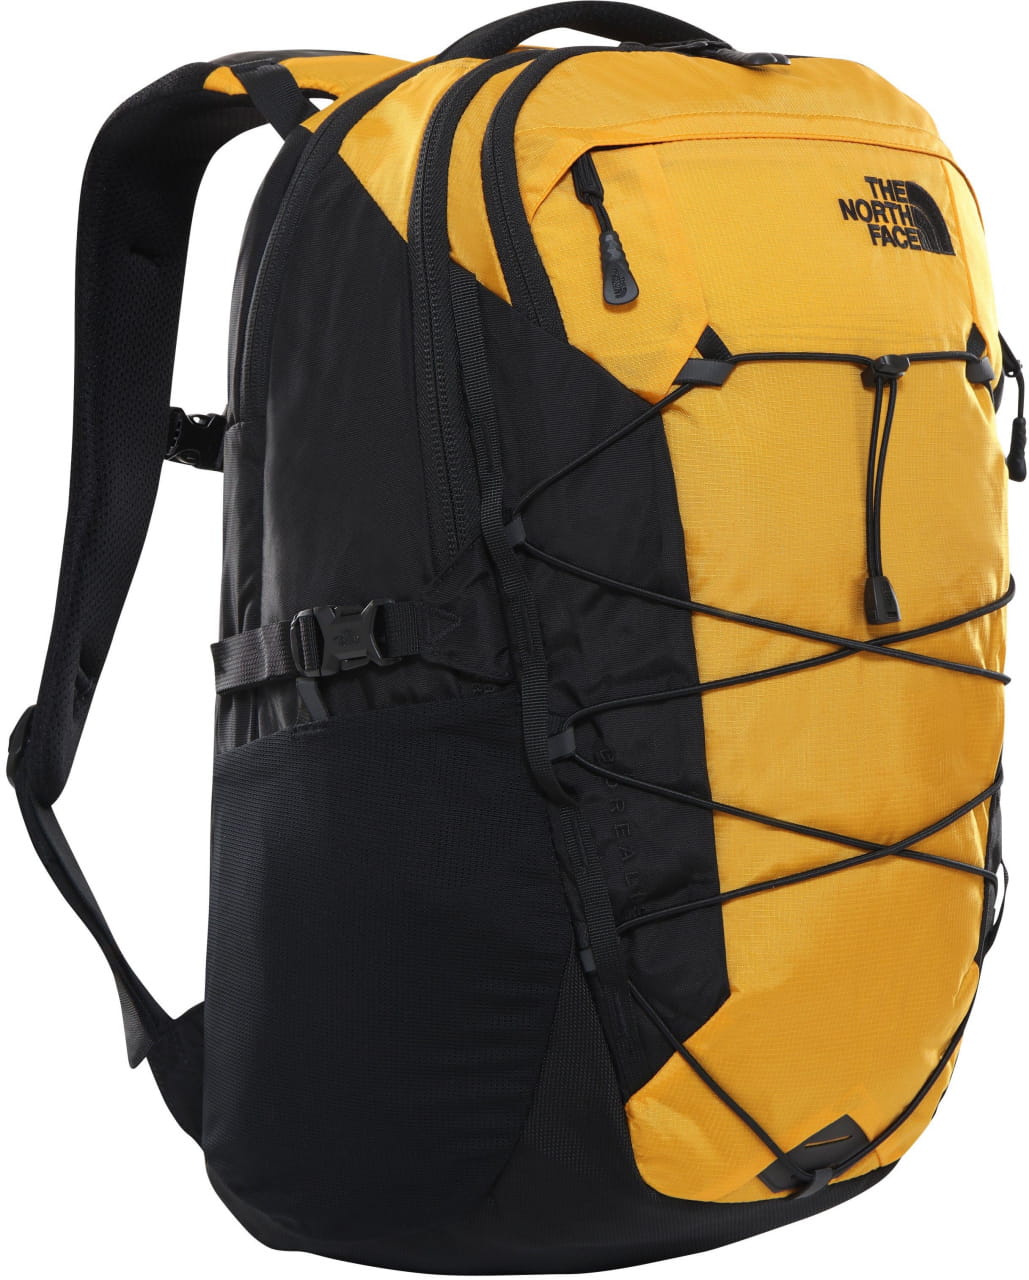 Torbe in nahrbtniki The North Face Borealis Backpack